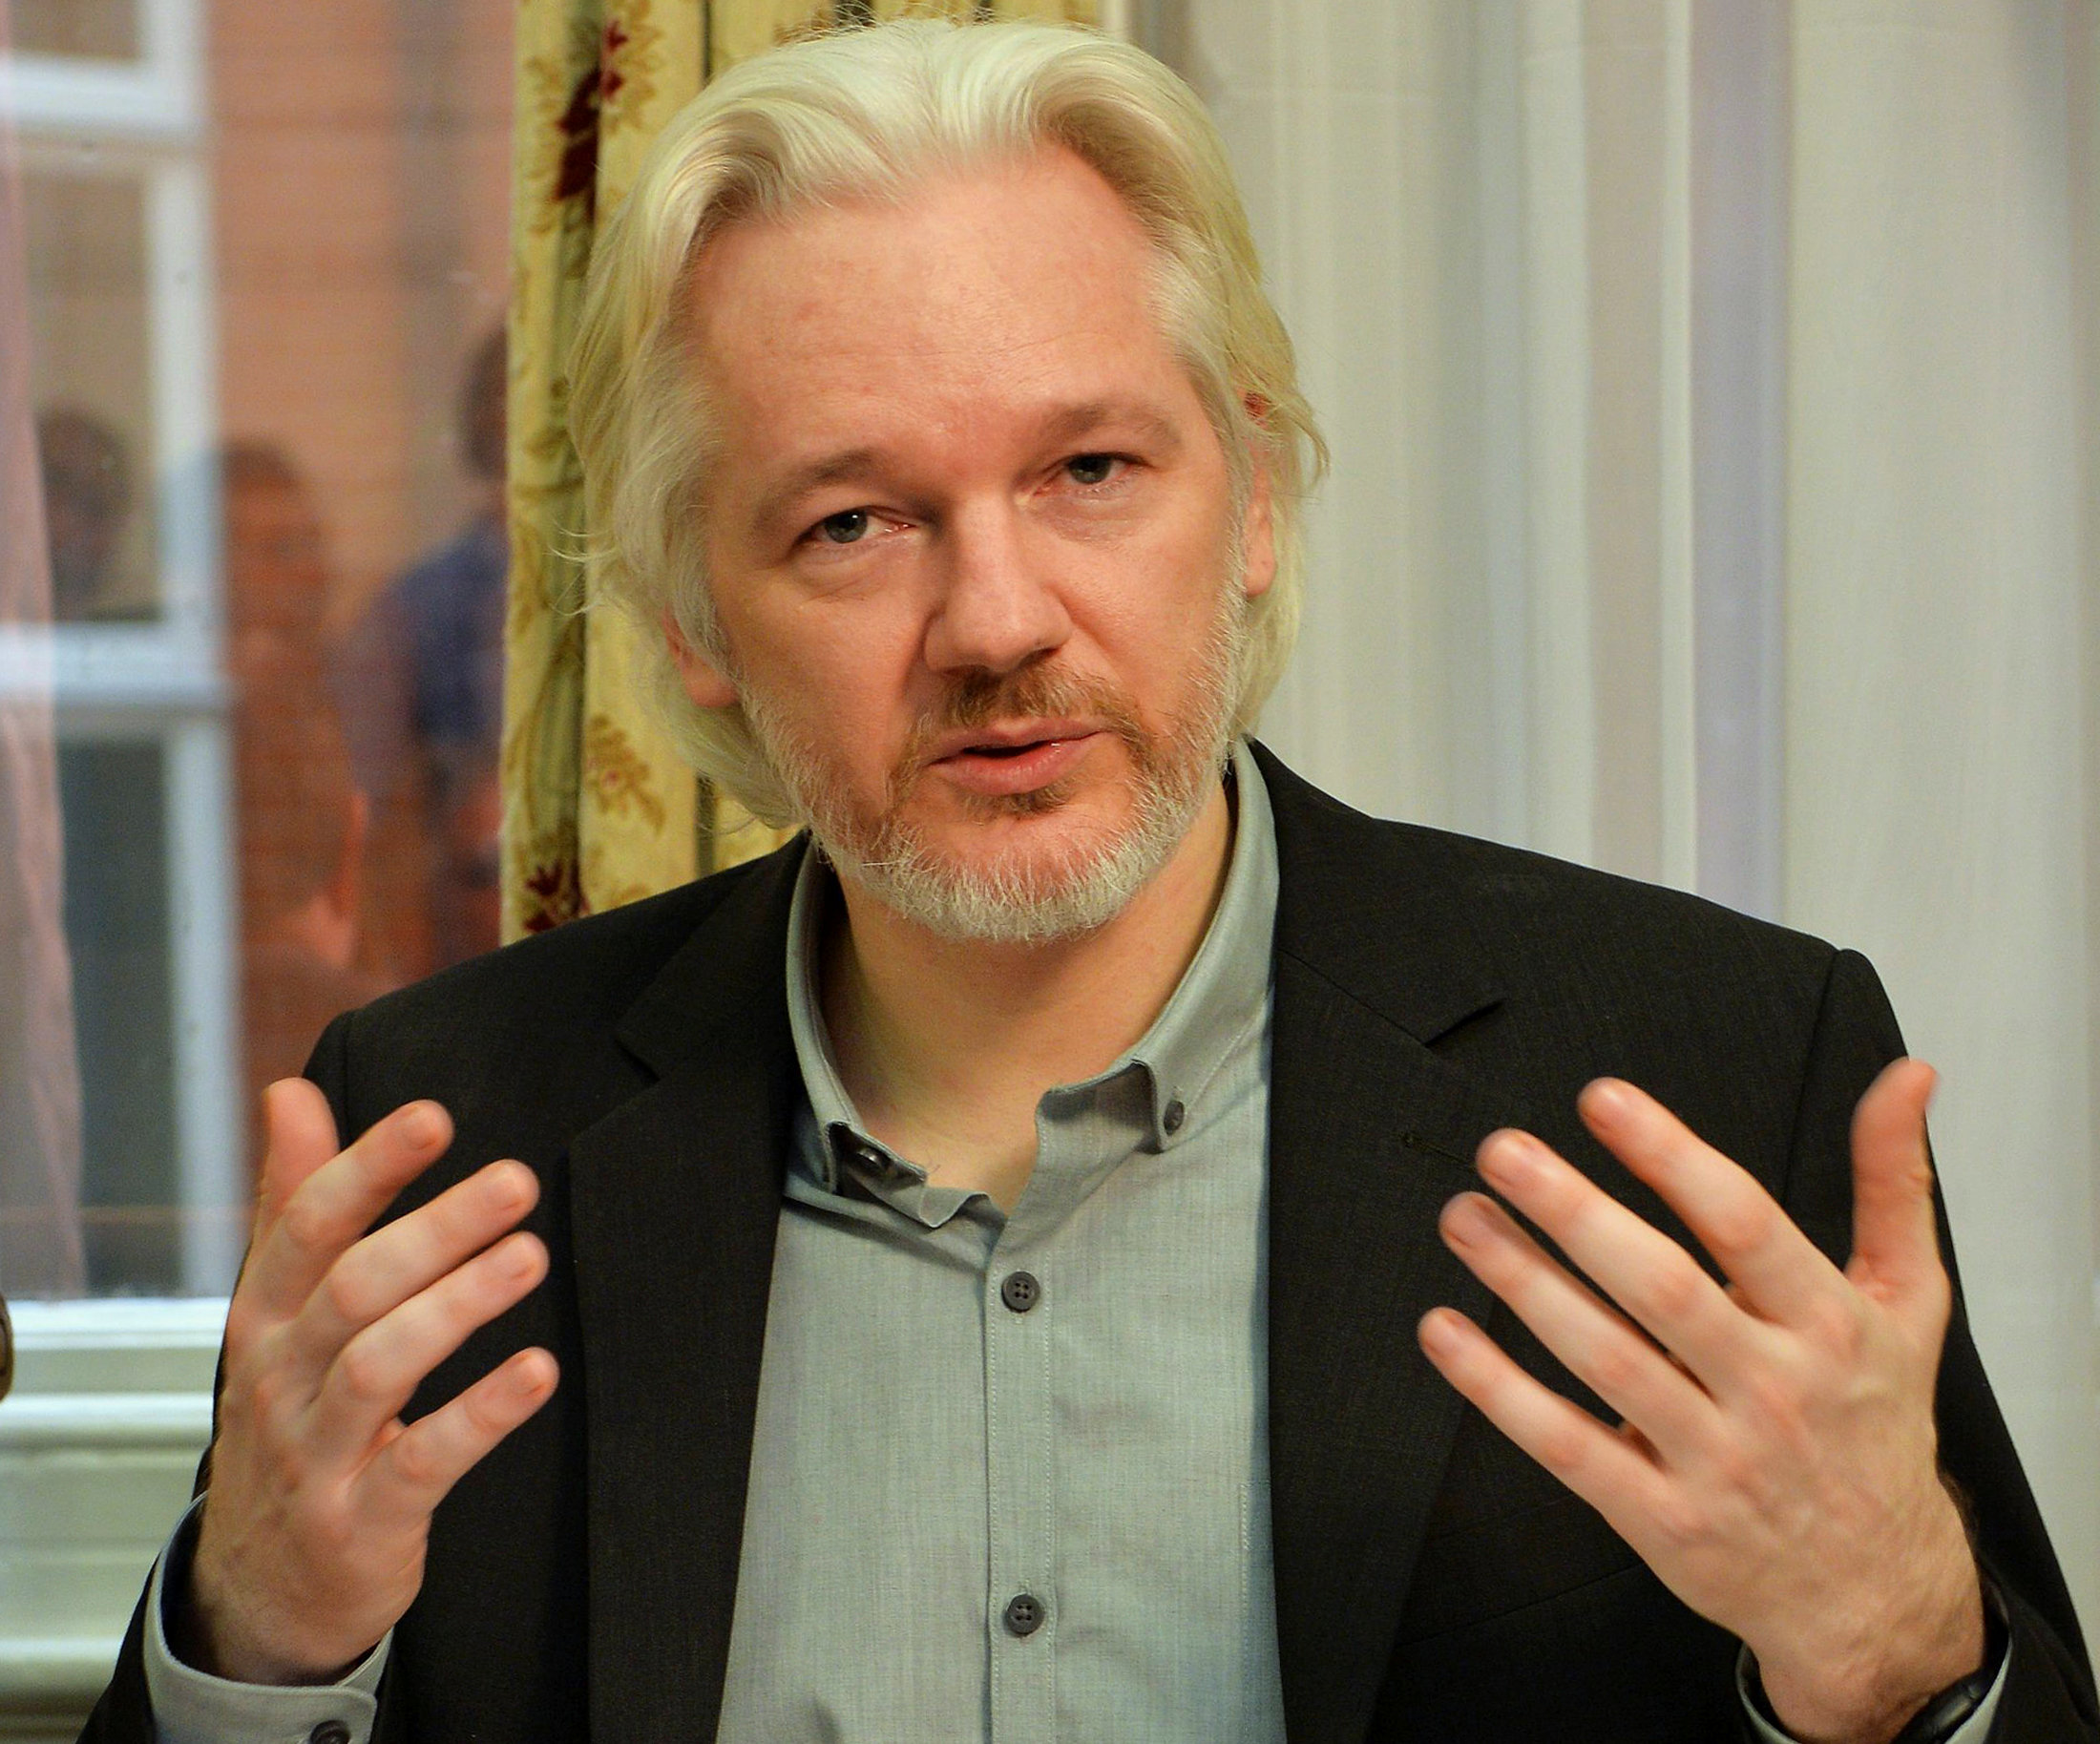 “Enough is enough”: How Australia’s quiet diplomacy led Julian Assange to freedom